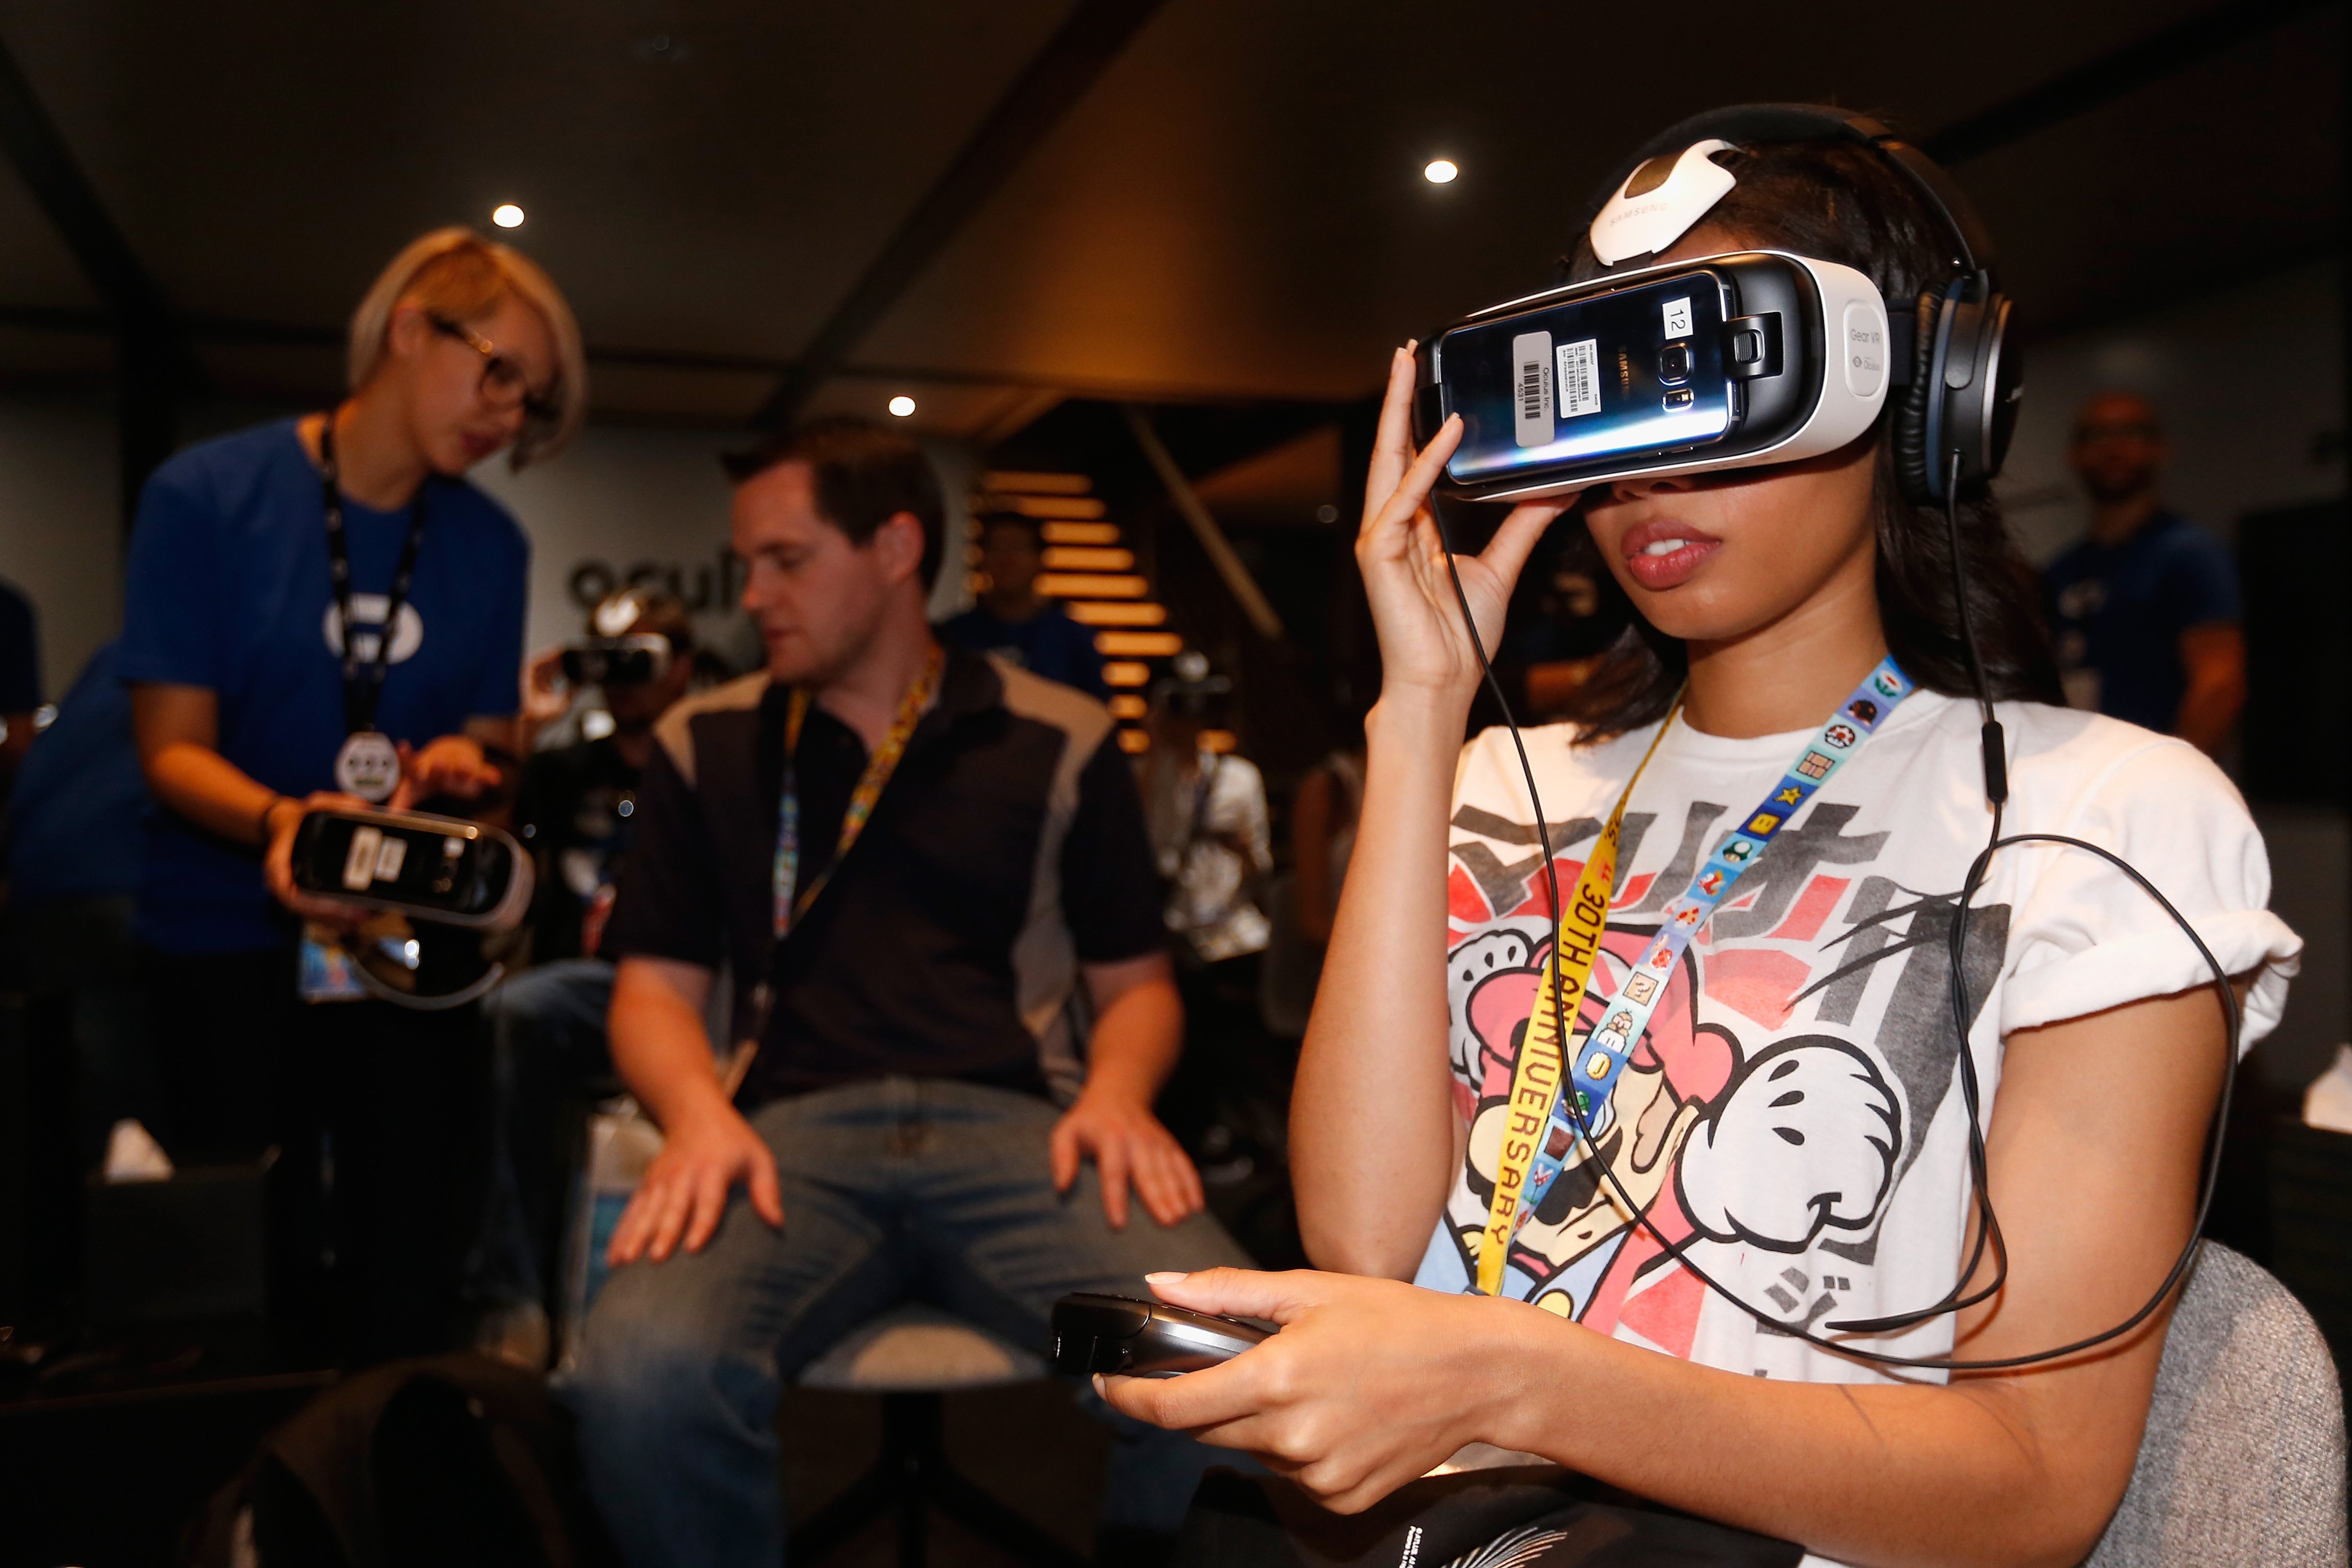 Game enthusiasts test the Samsung Gear VR powered by Oculus at the Annual Gaming Industry Conference E3 at  the Los Angeles Convention Center on June 16, 2015 in Los Angeles, California. (Christian Petersen&mdash;Getty Images)